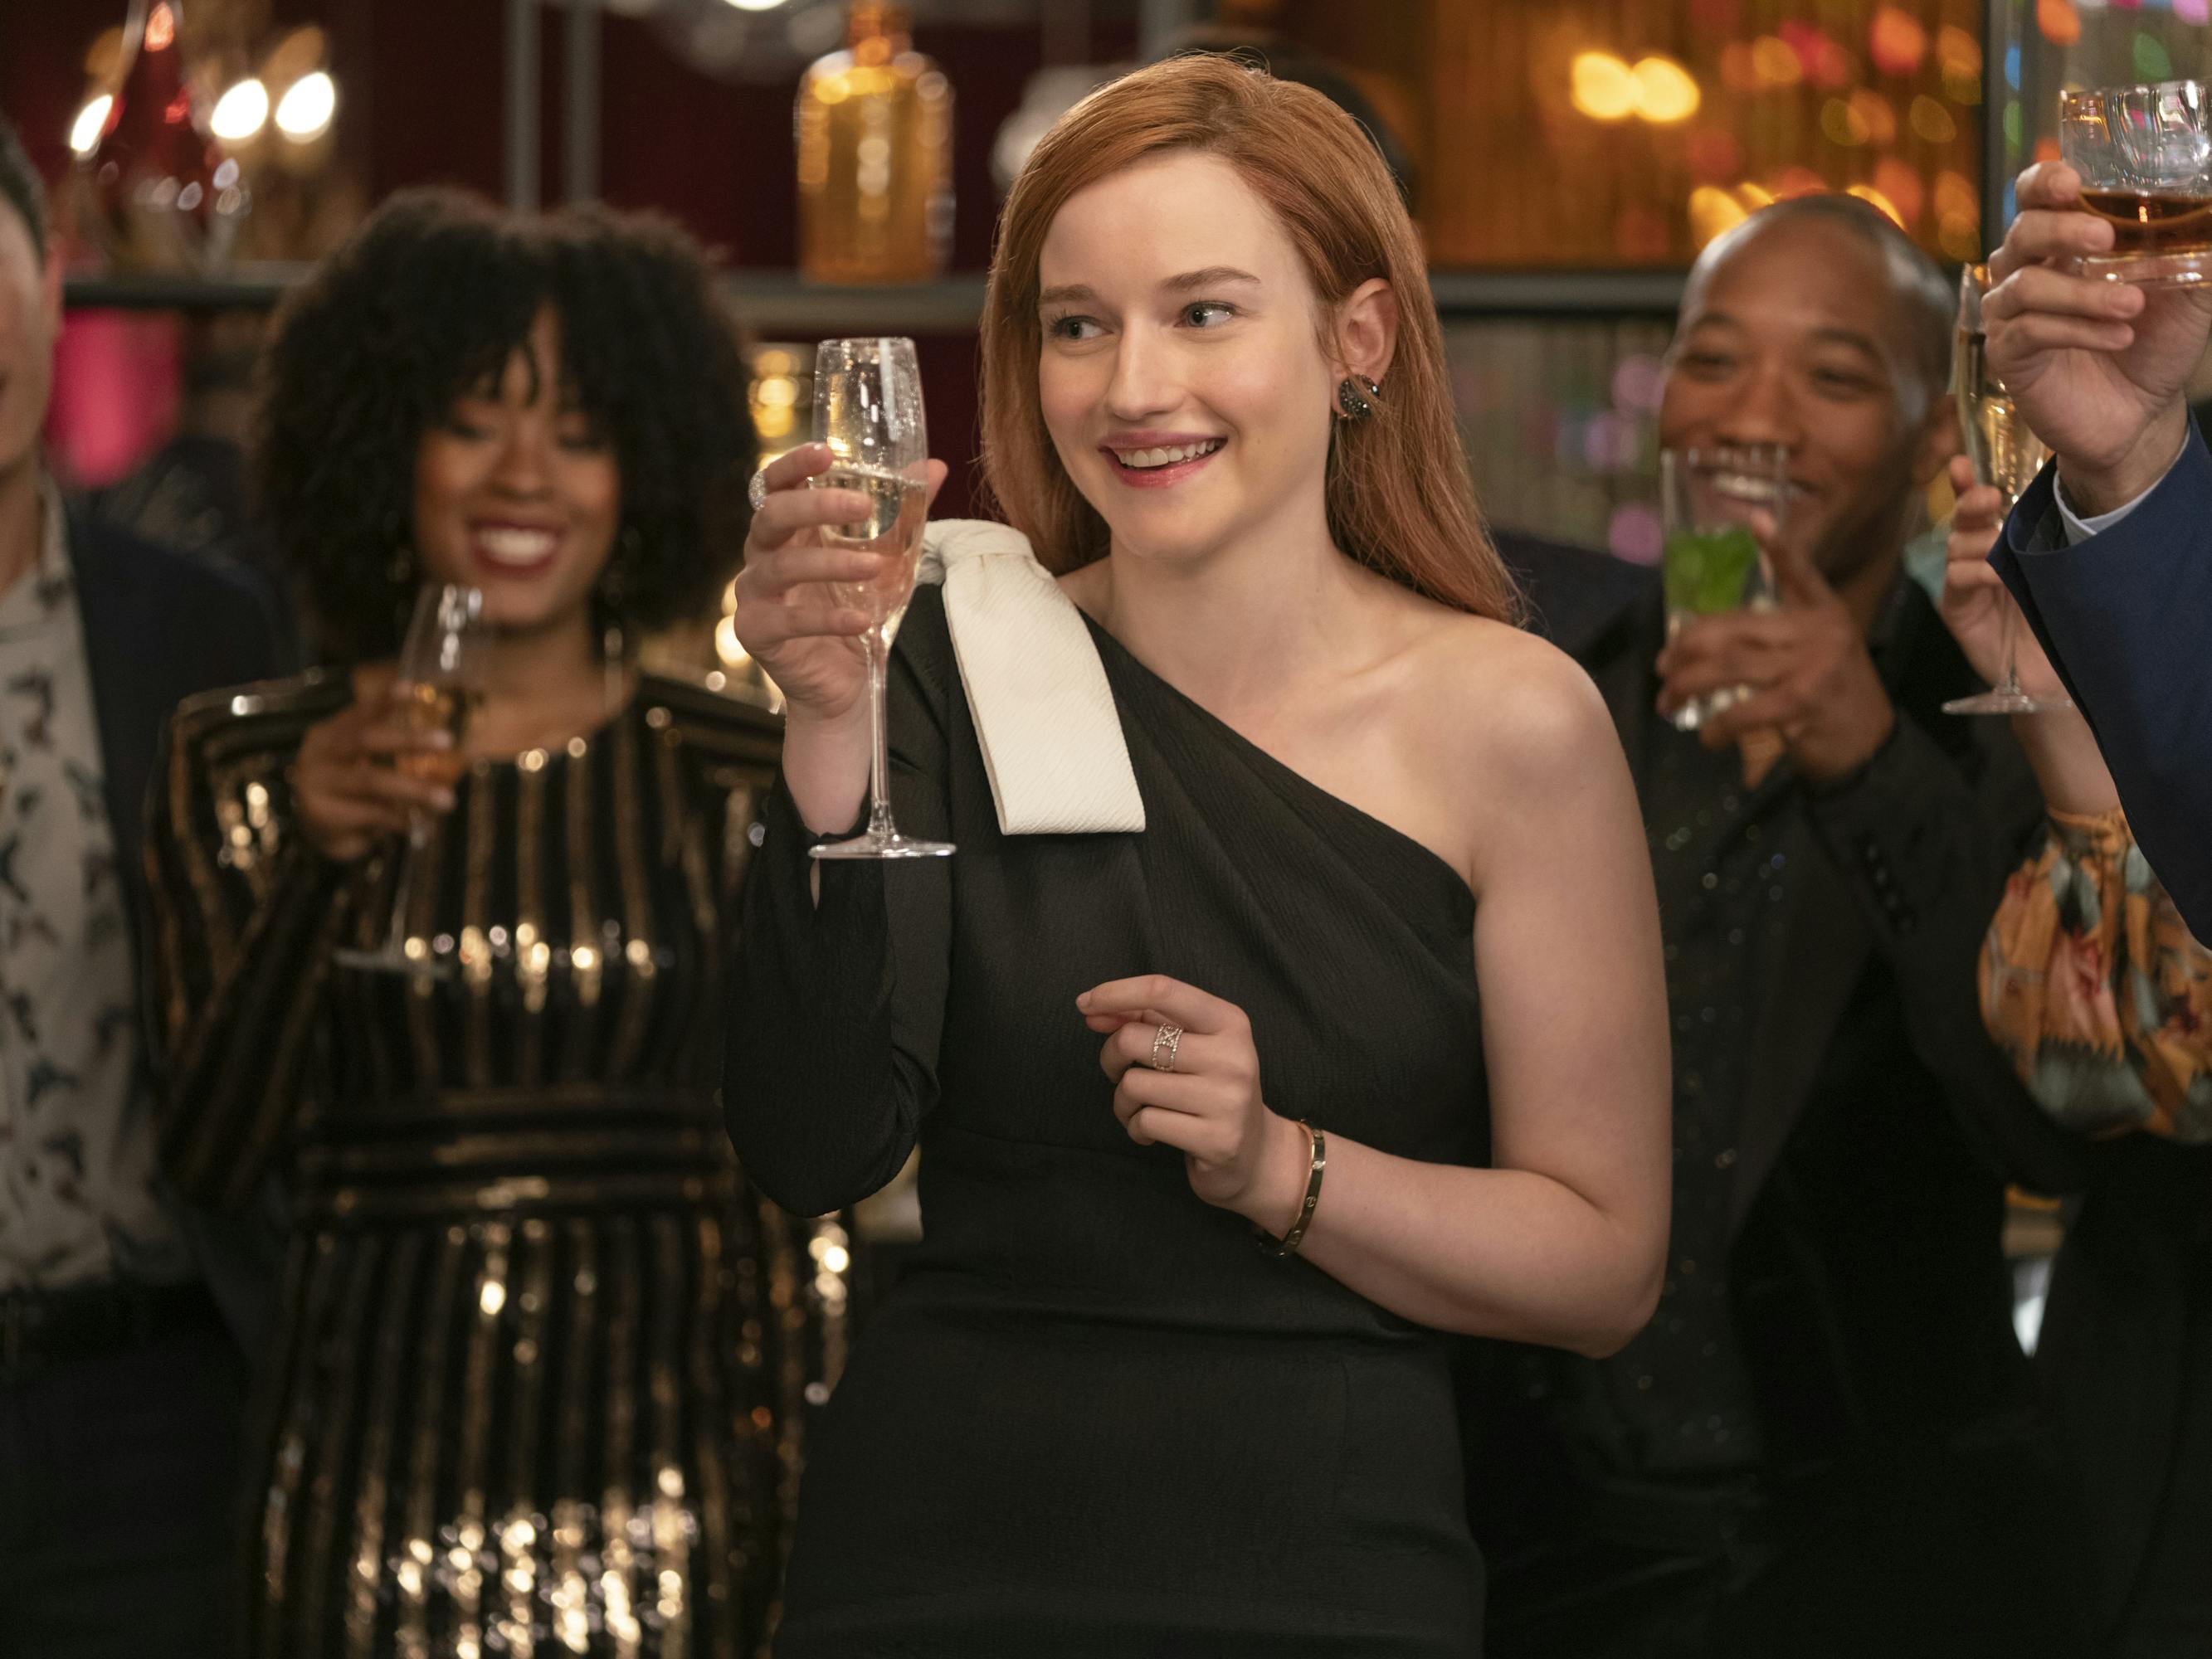 Julia Garner wears a black dress and accepts a toast from a crowd of people behind her.